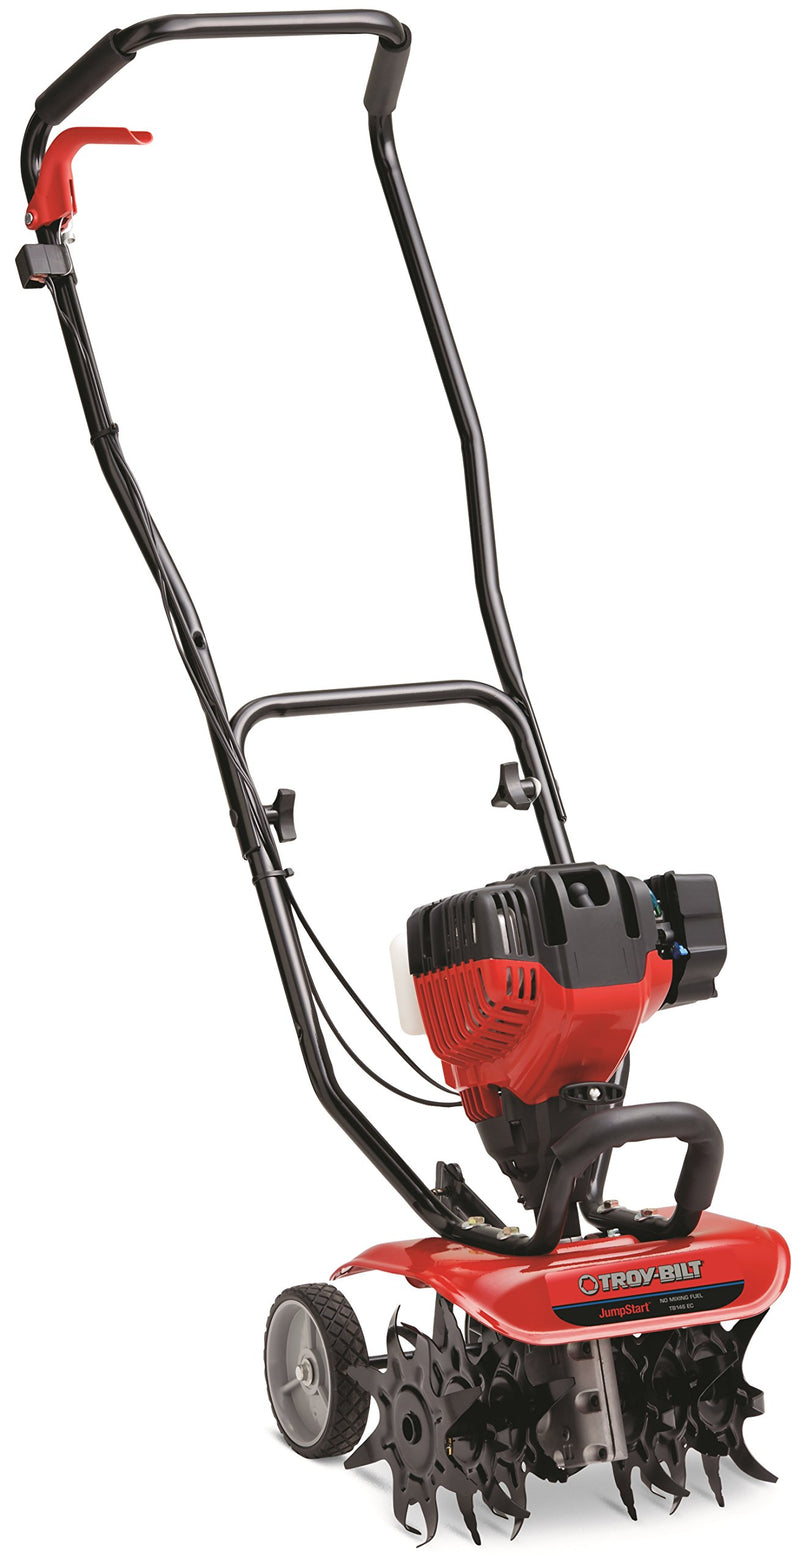 Troy-Bilt TB146 EC 29cc 4-Cycle Cultivator with JumpStart Technology  [Remanufactured]